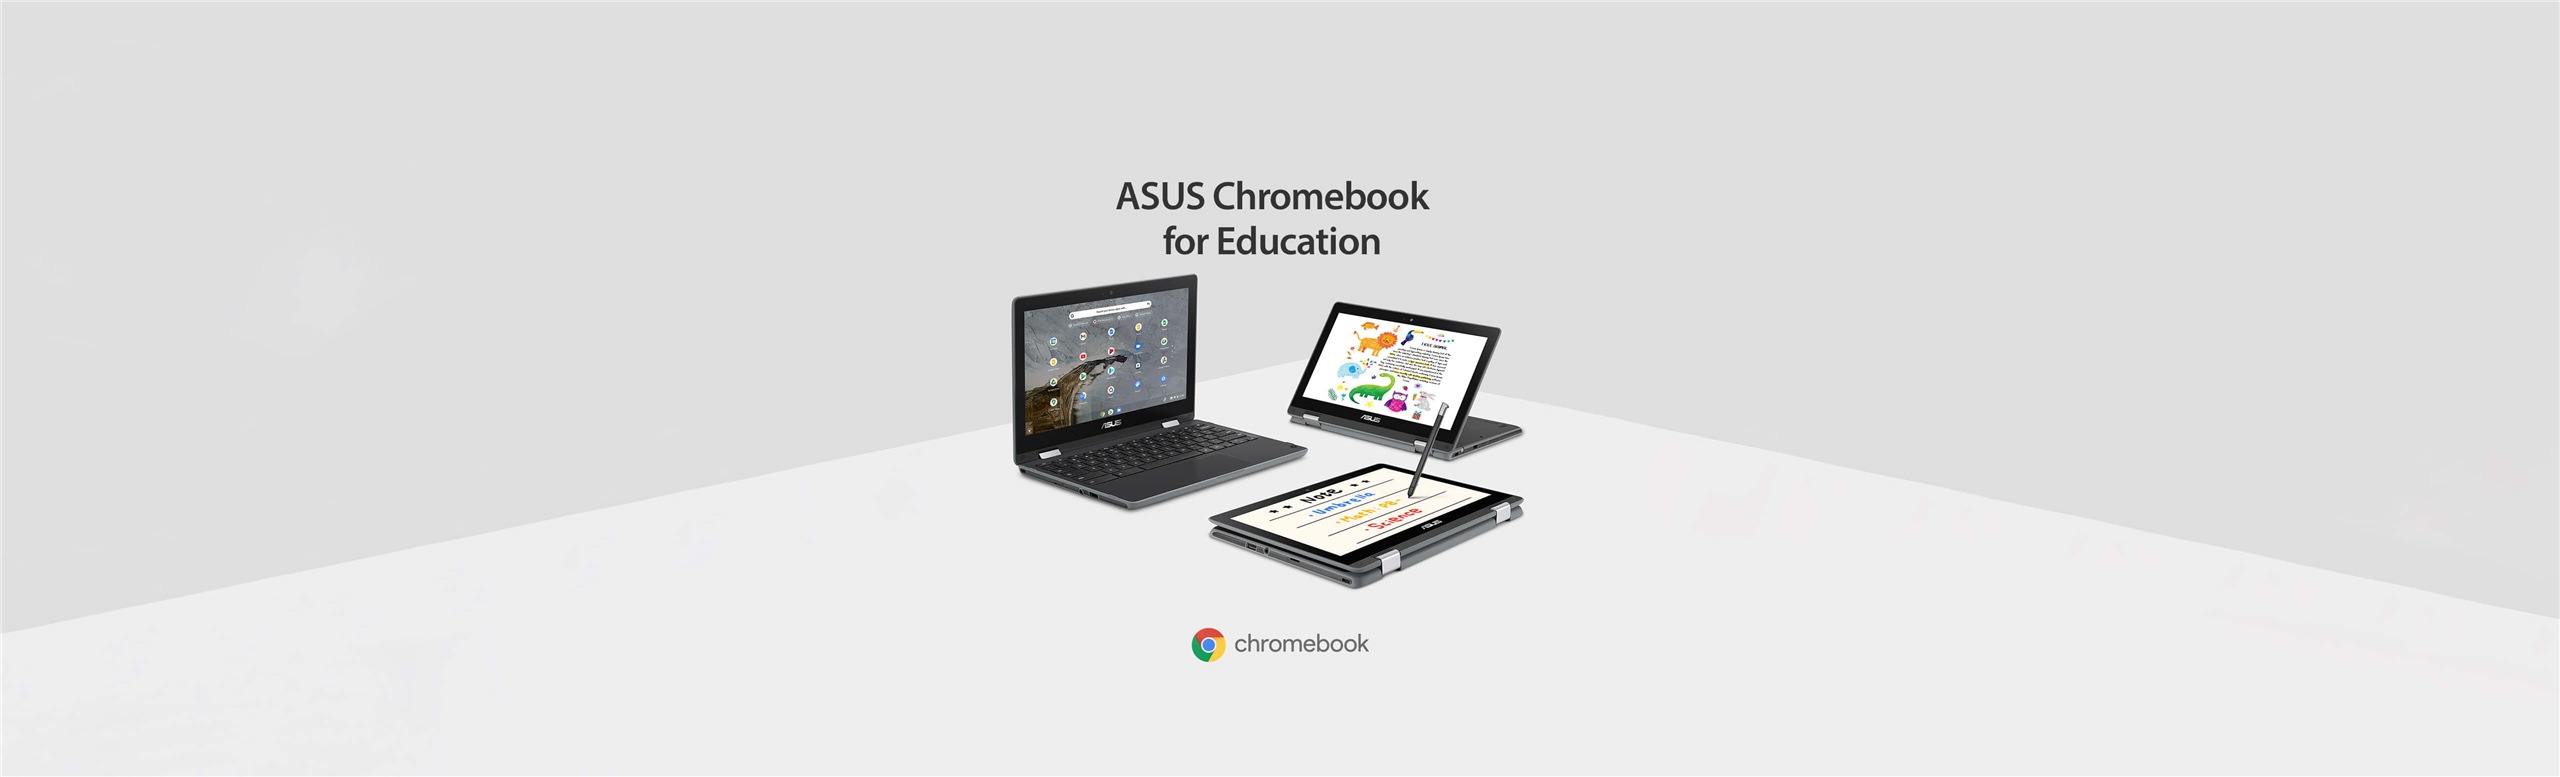 ASUS Chromebook for Education